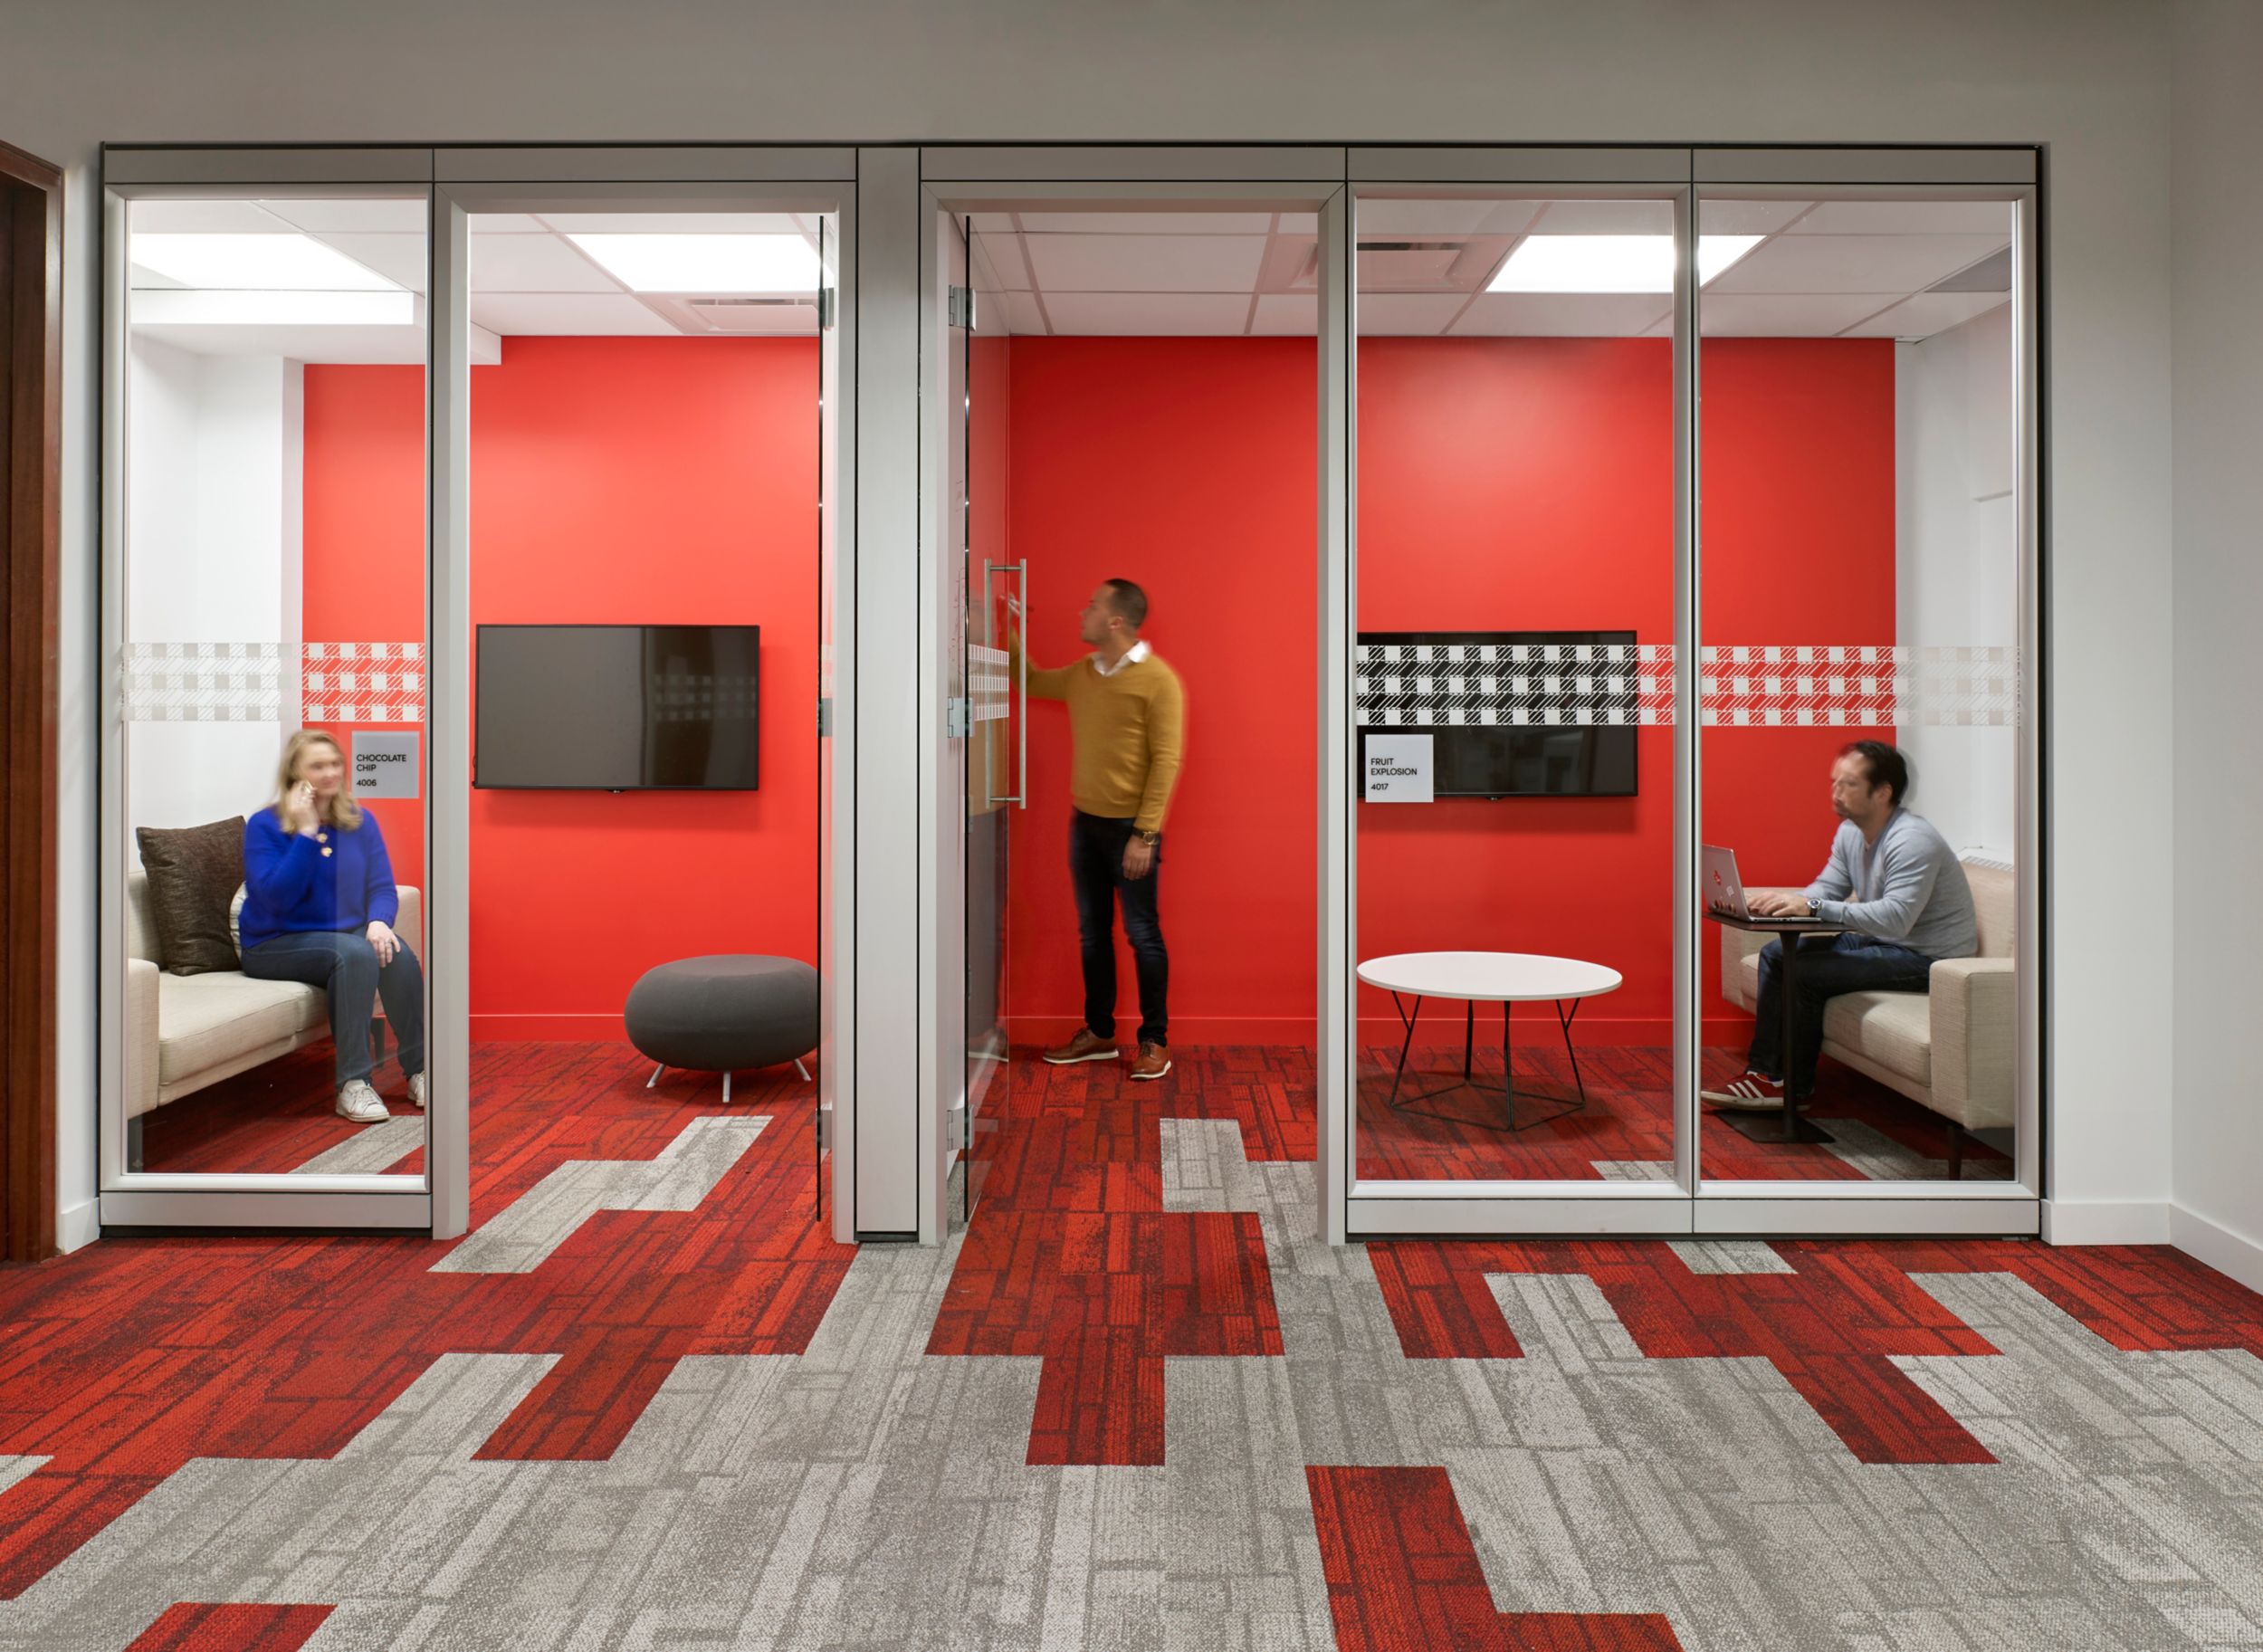 Interface Neighborhood Blocks plank carpet tile in office corridor and small meeting rooms with people working image number 11